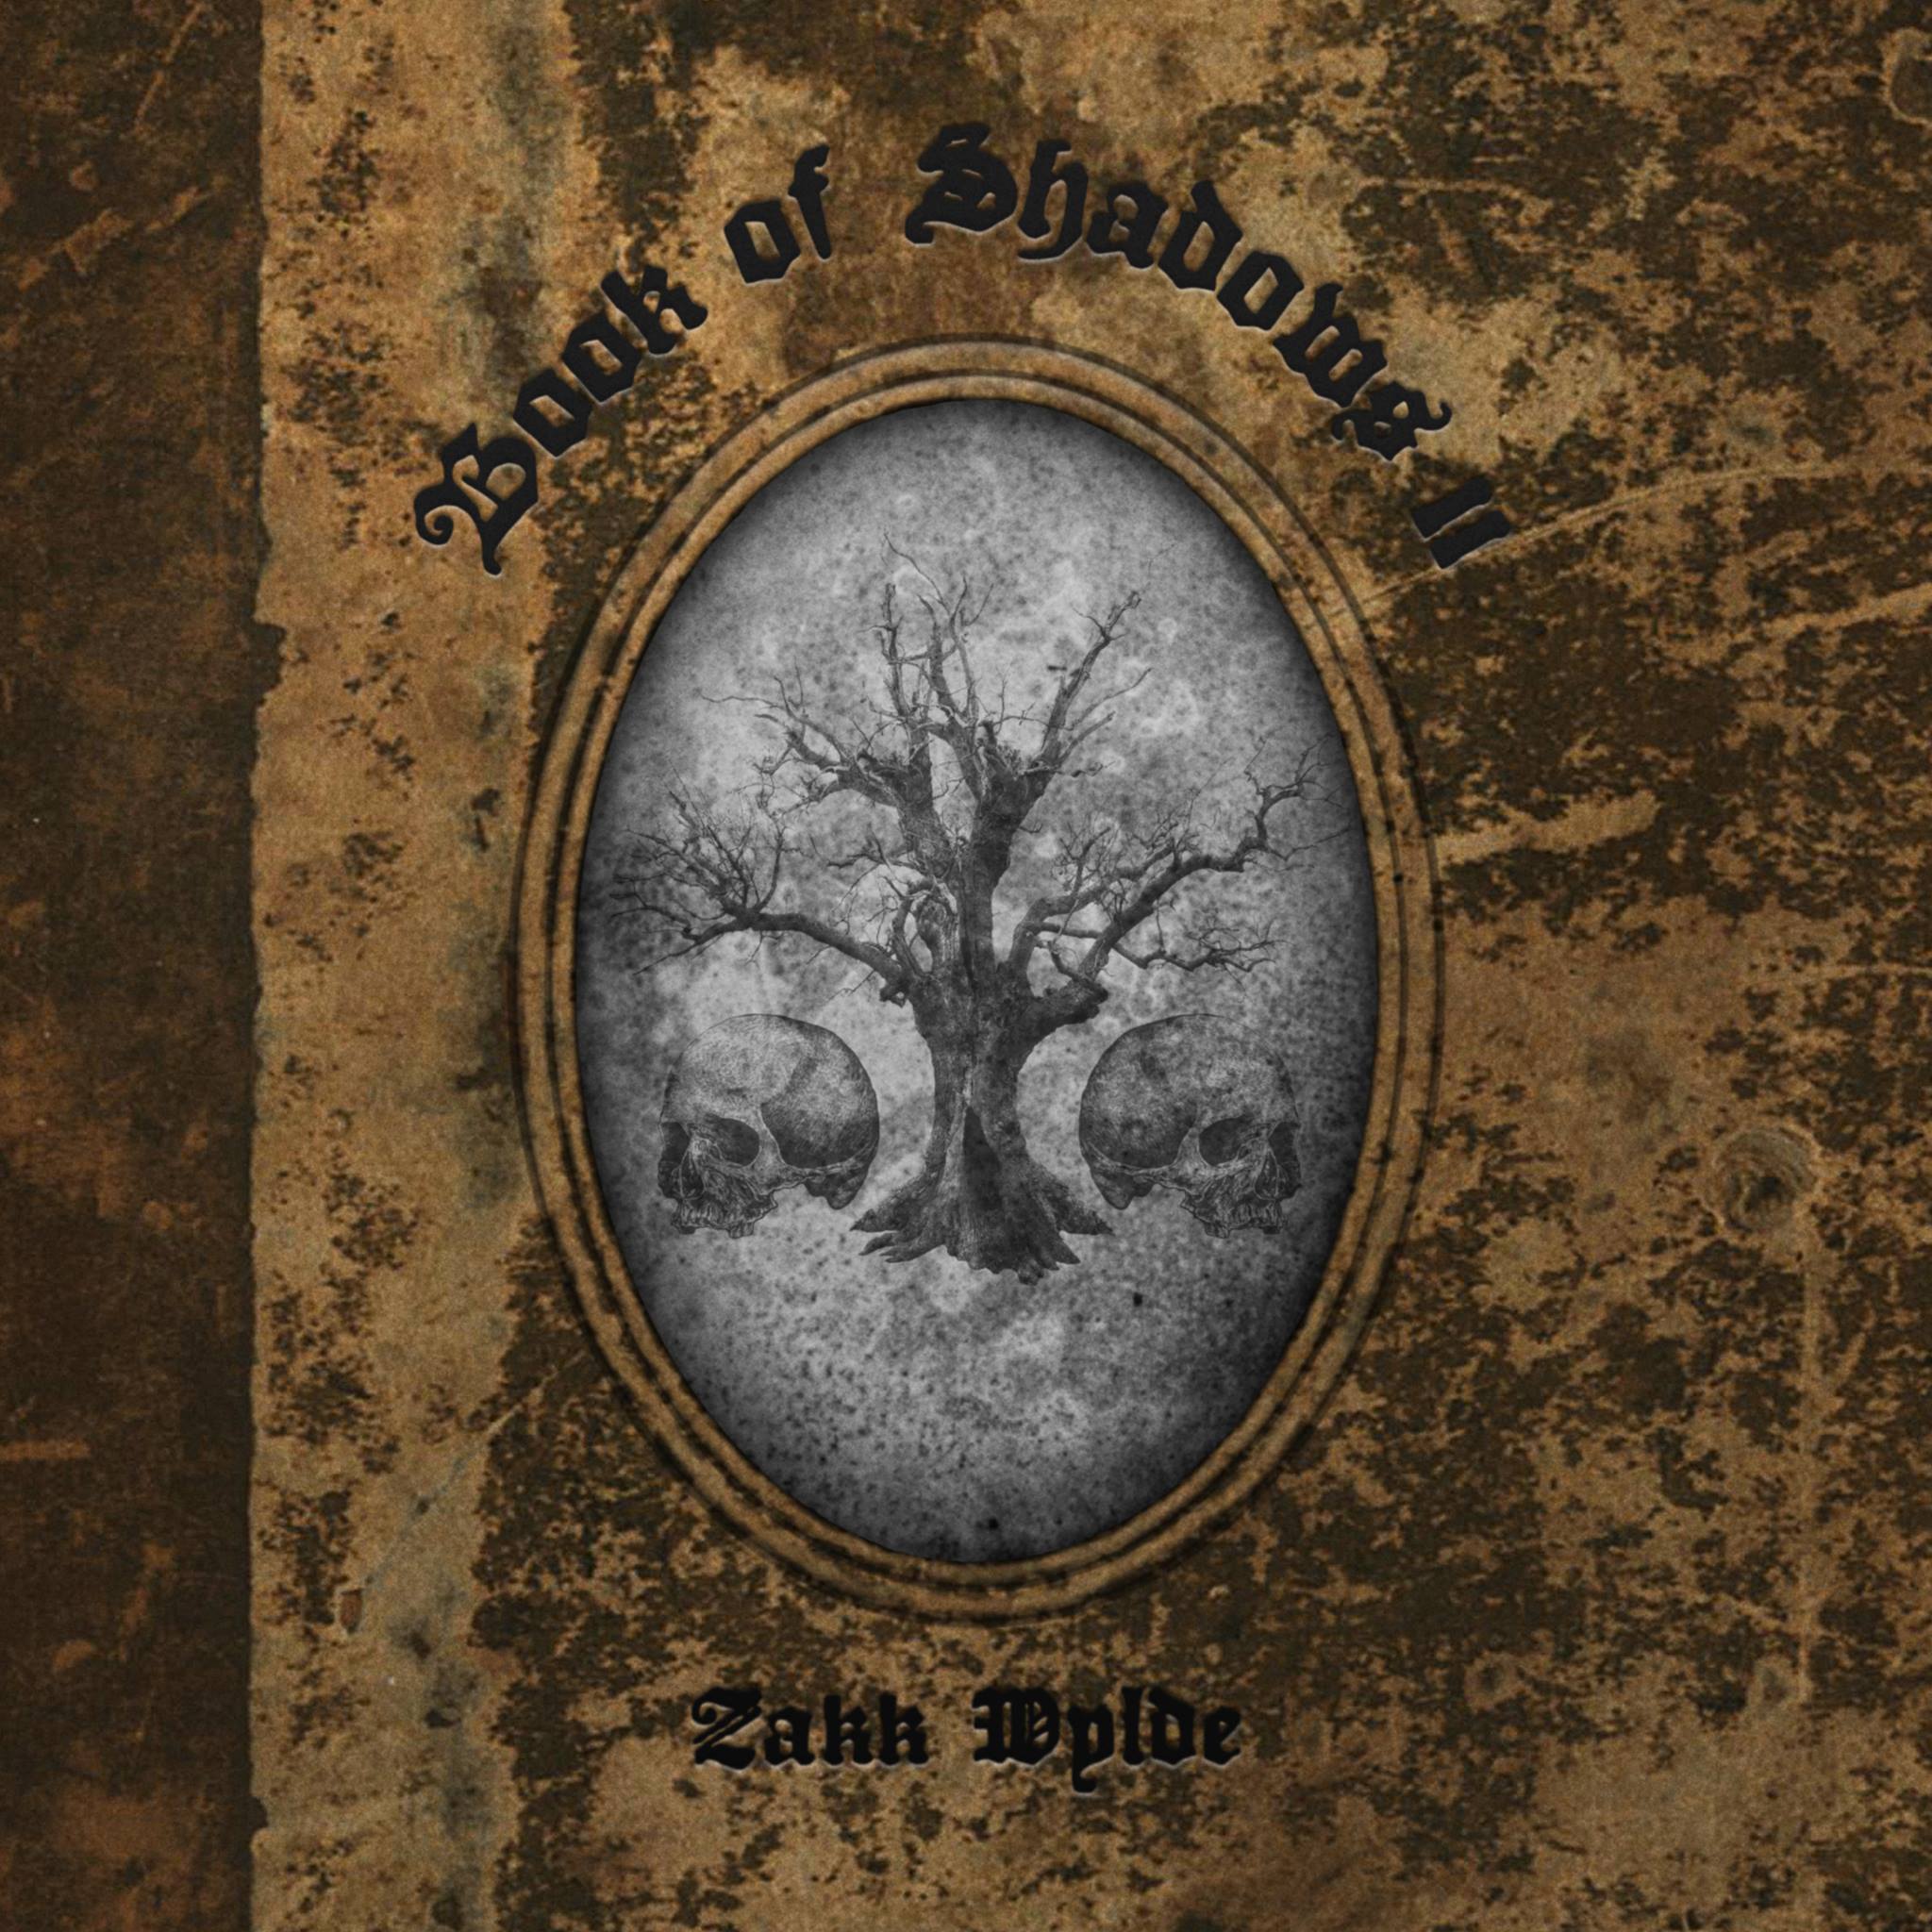 Zakk Wylde - "Book Of Shadows II" Due Out On April 8, 2016